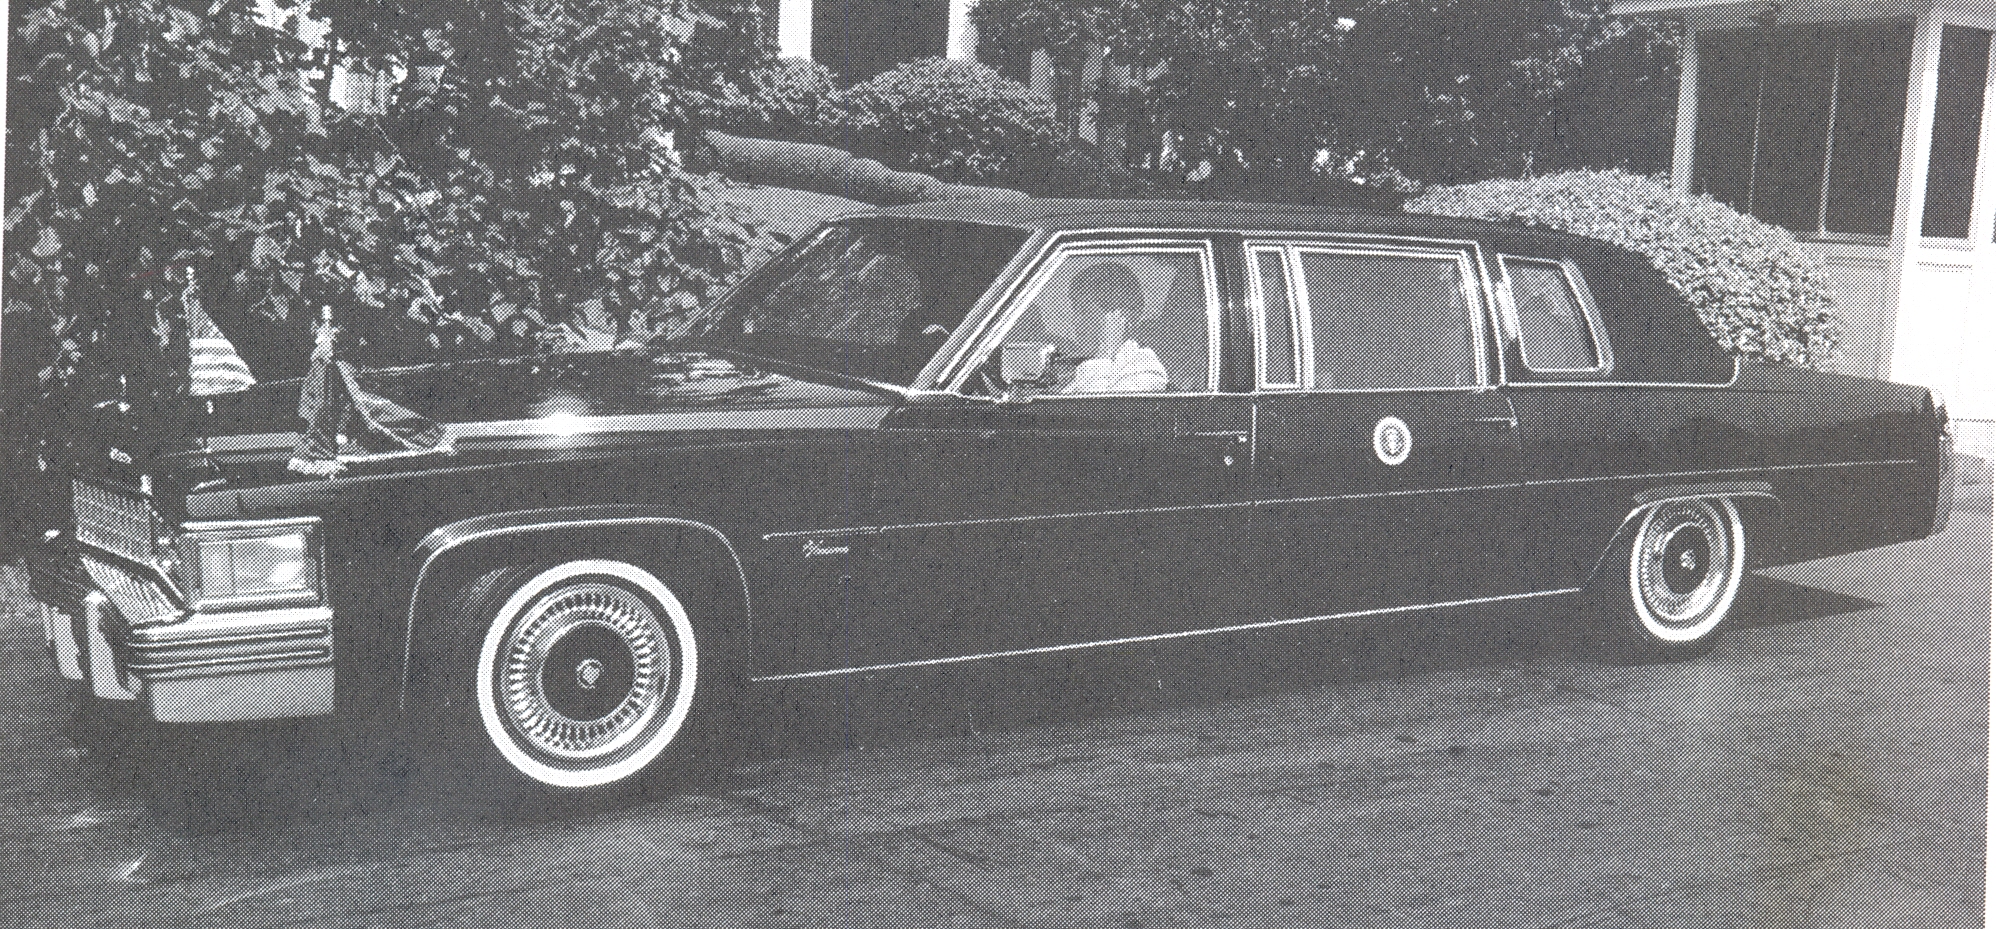 File photo: Special Agent Mary Ann Gordon was the lead transportation agent the day John Hinckley opened fire on President Ronald Reagan’s detail as he was departing the Washington Hilton Hotel March 31, 1981.